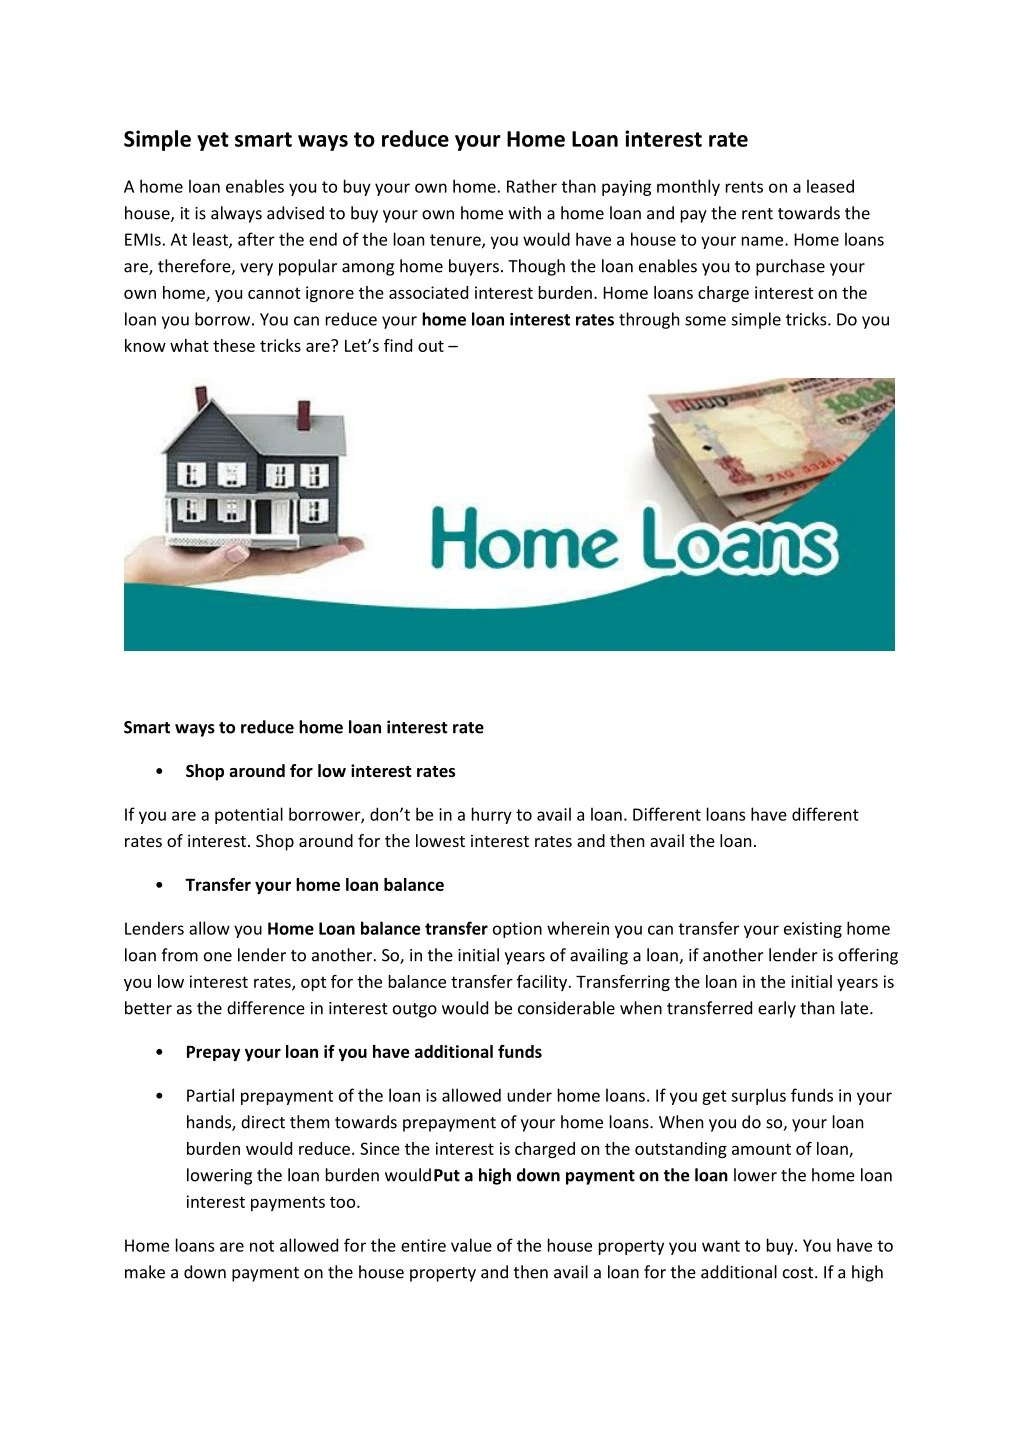 simple yet smart ways to reduce your home loan